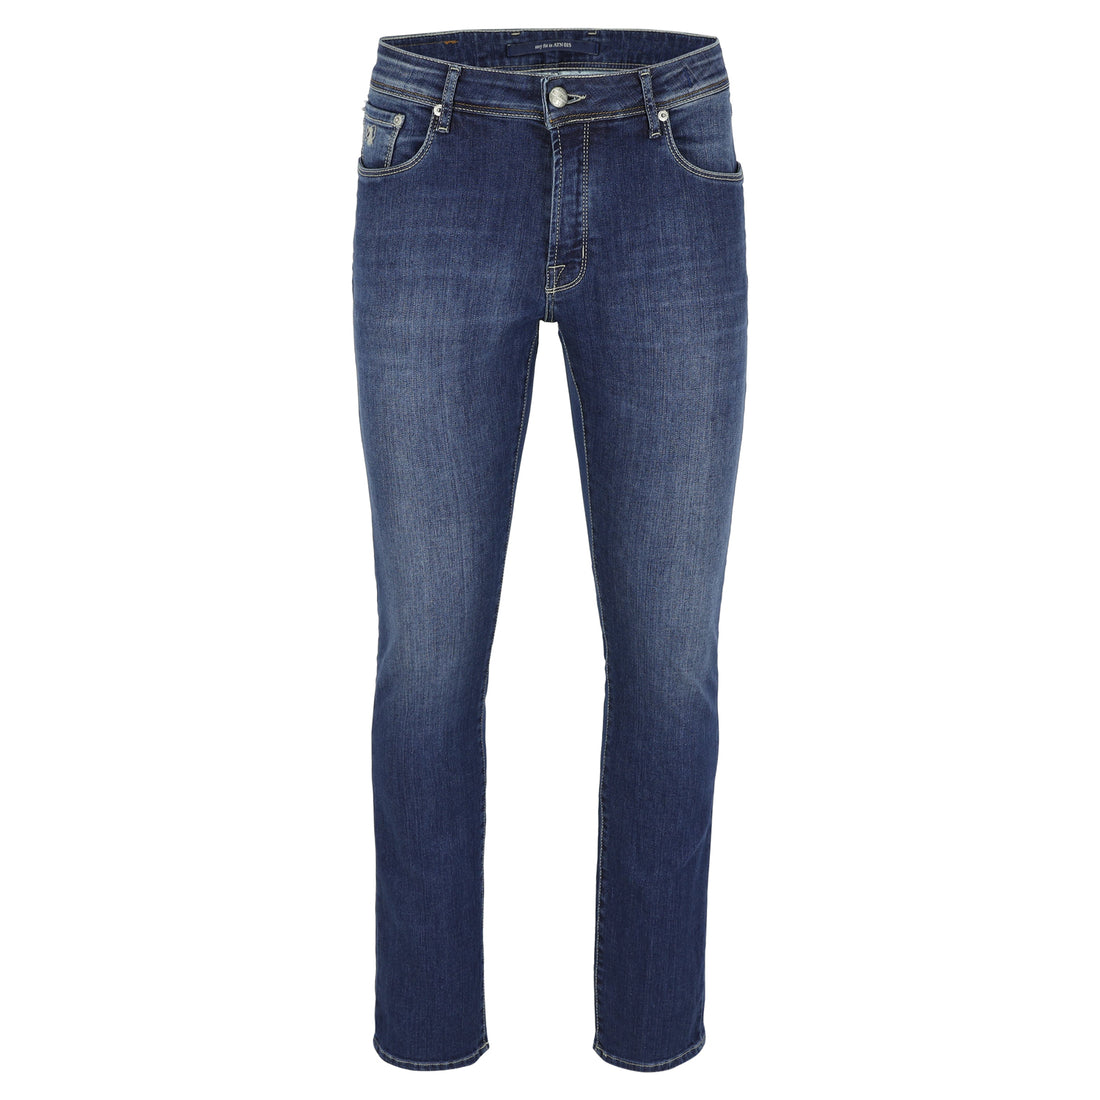 Jeans ATN01S-A58 - donkerblauw